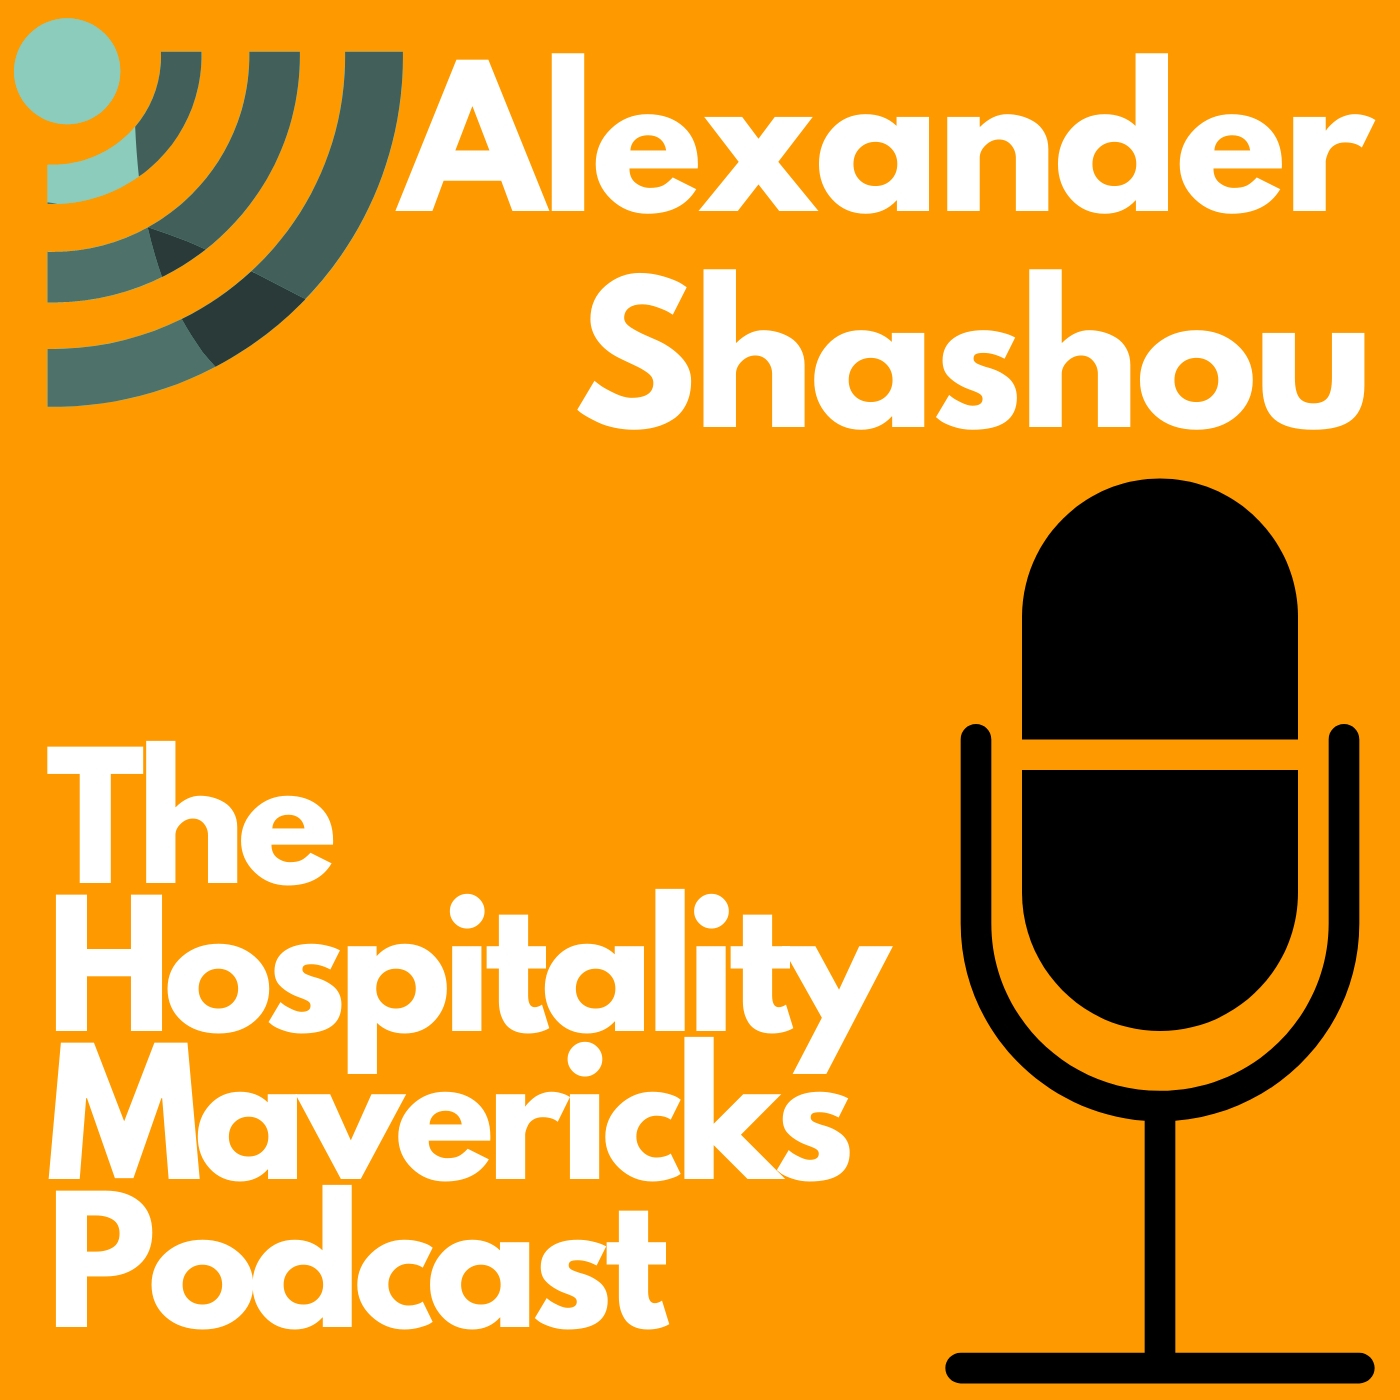 #27: Taking Hotel Operations Online With Alexander Shashou, Co-Founder and President of ALICE Image